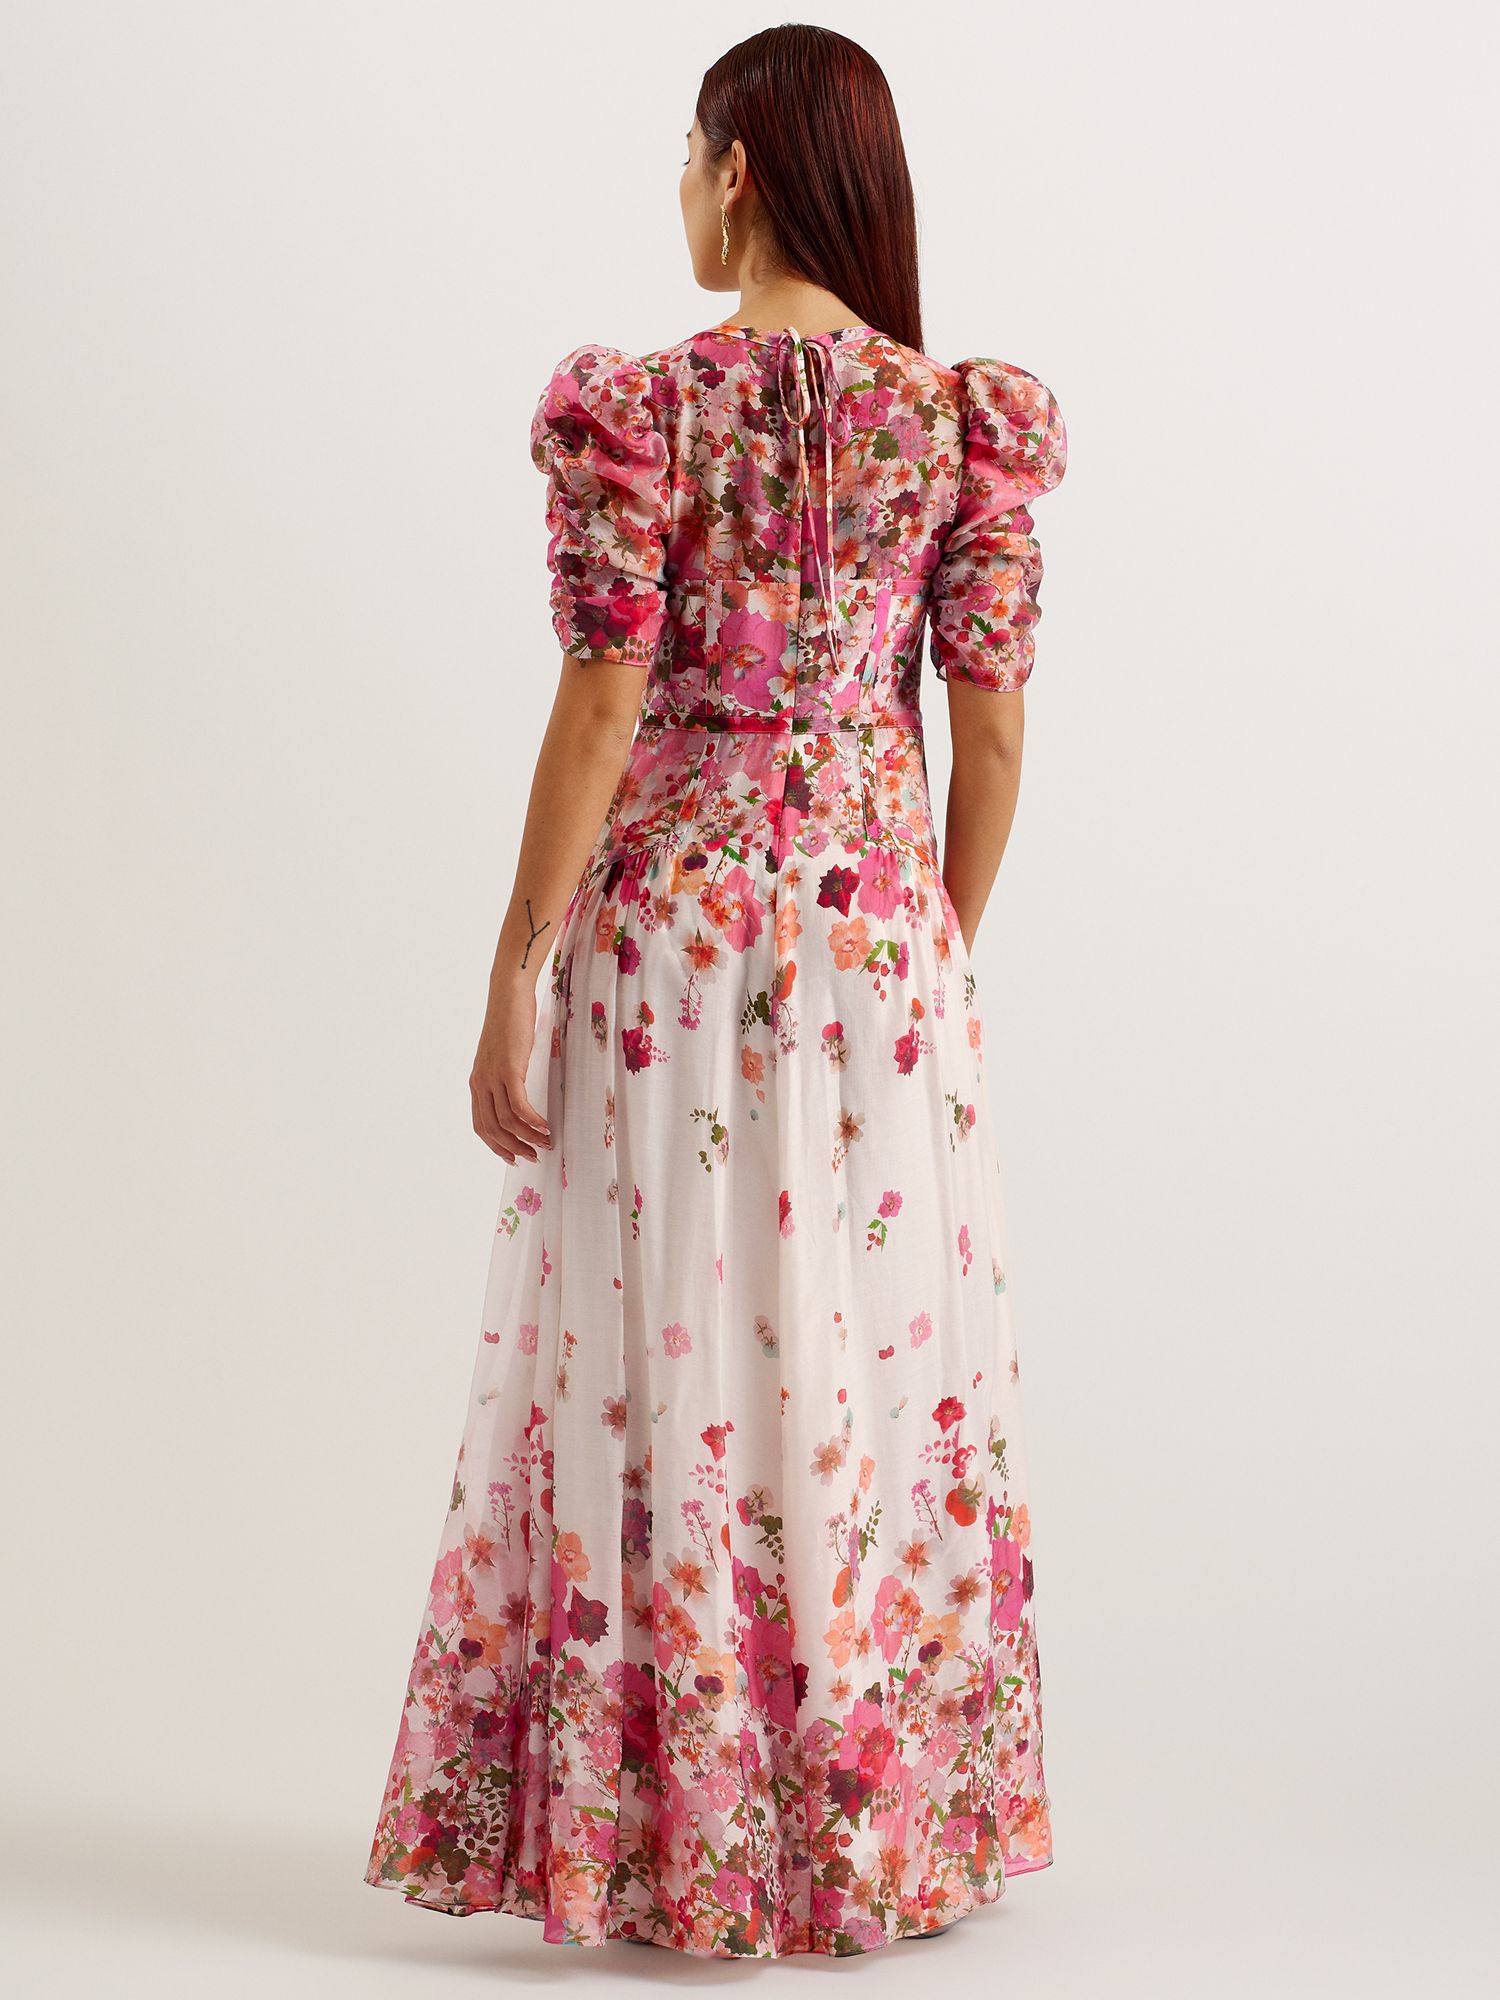 Ted Baker Alviano Floral Print Maxi Dress, Pink/Multi, 8